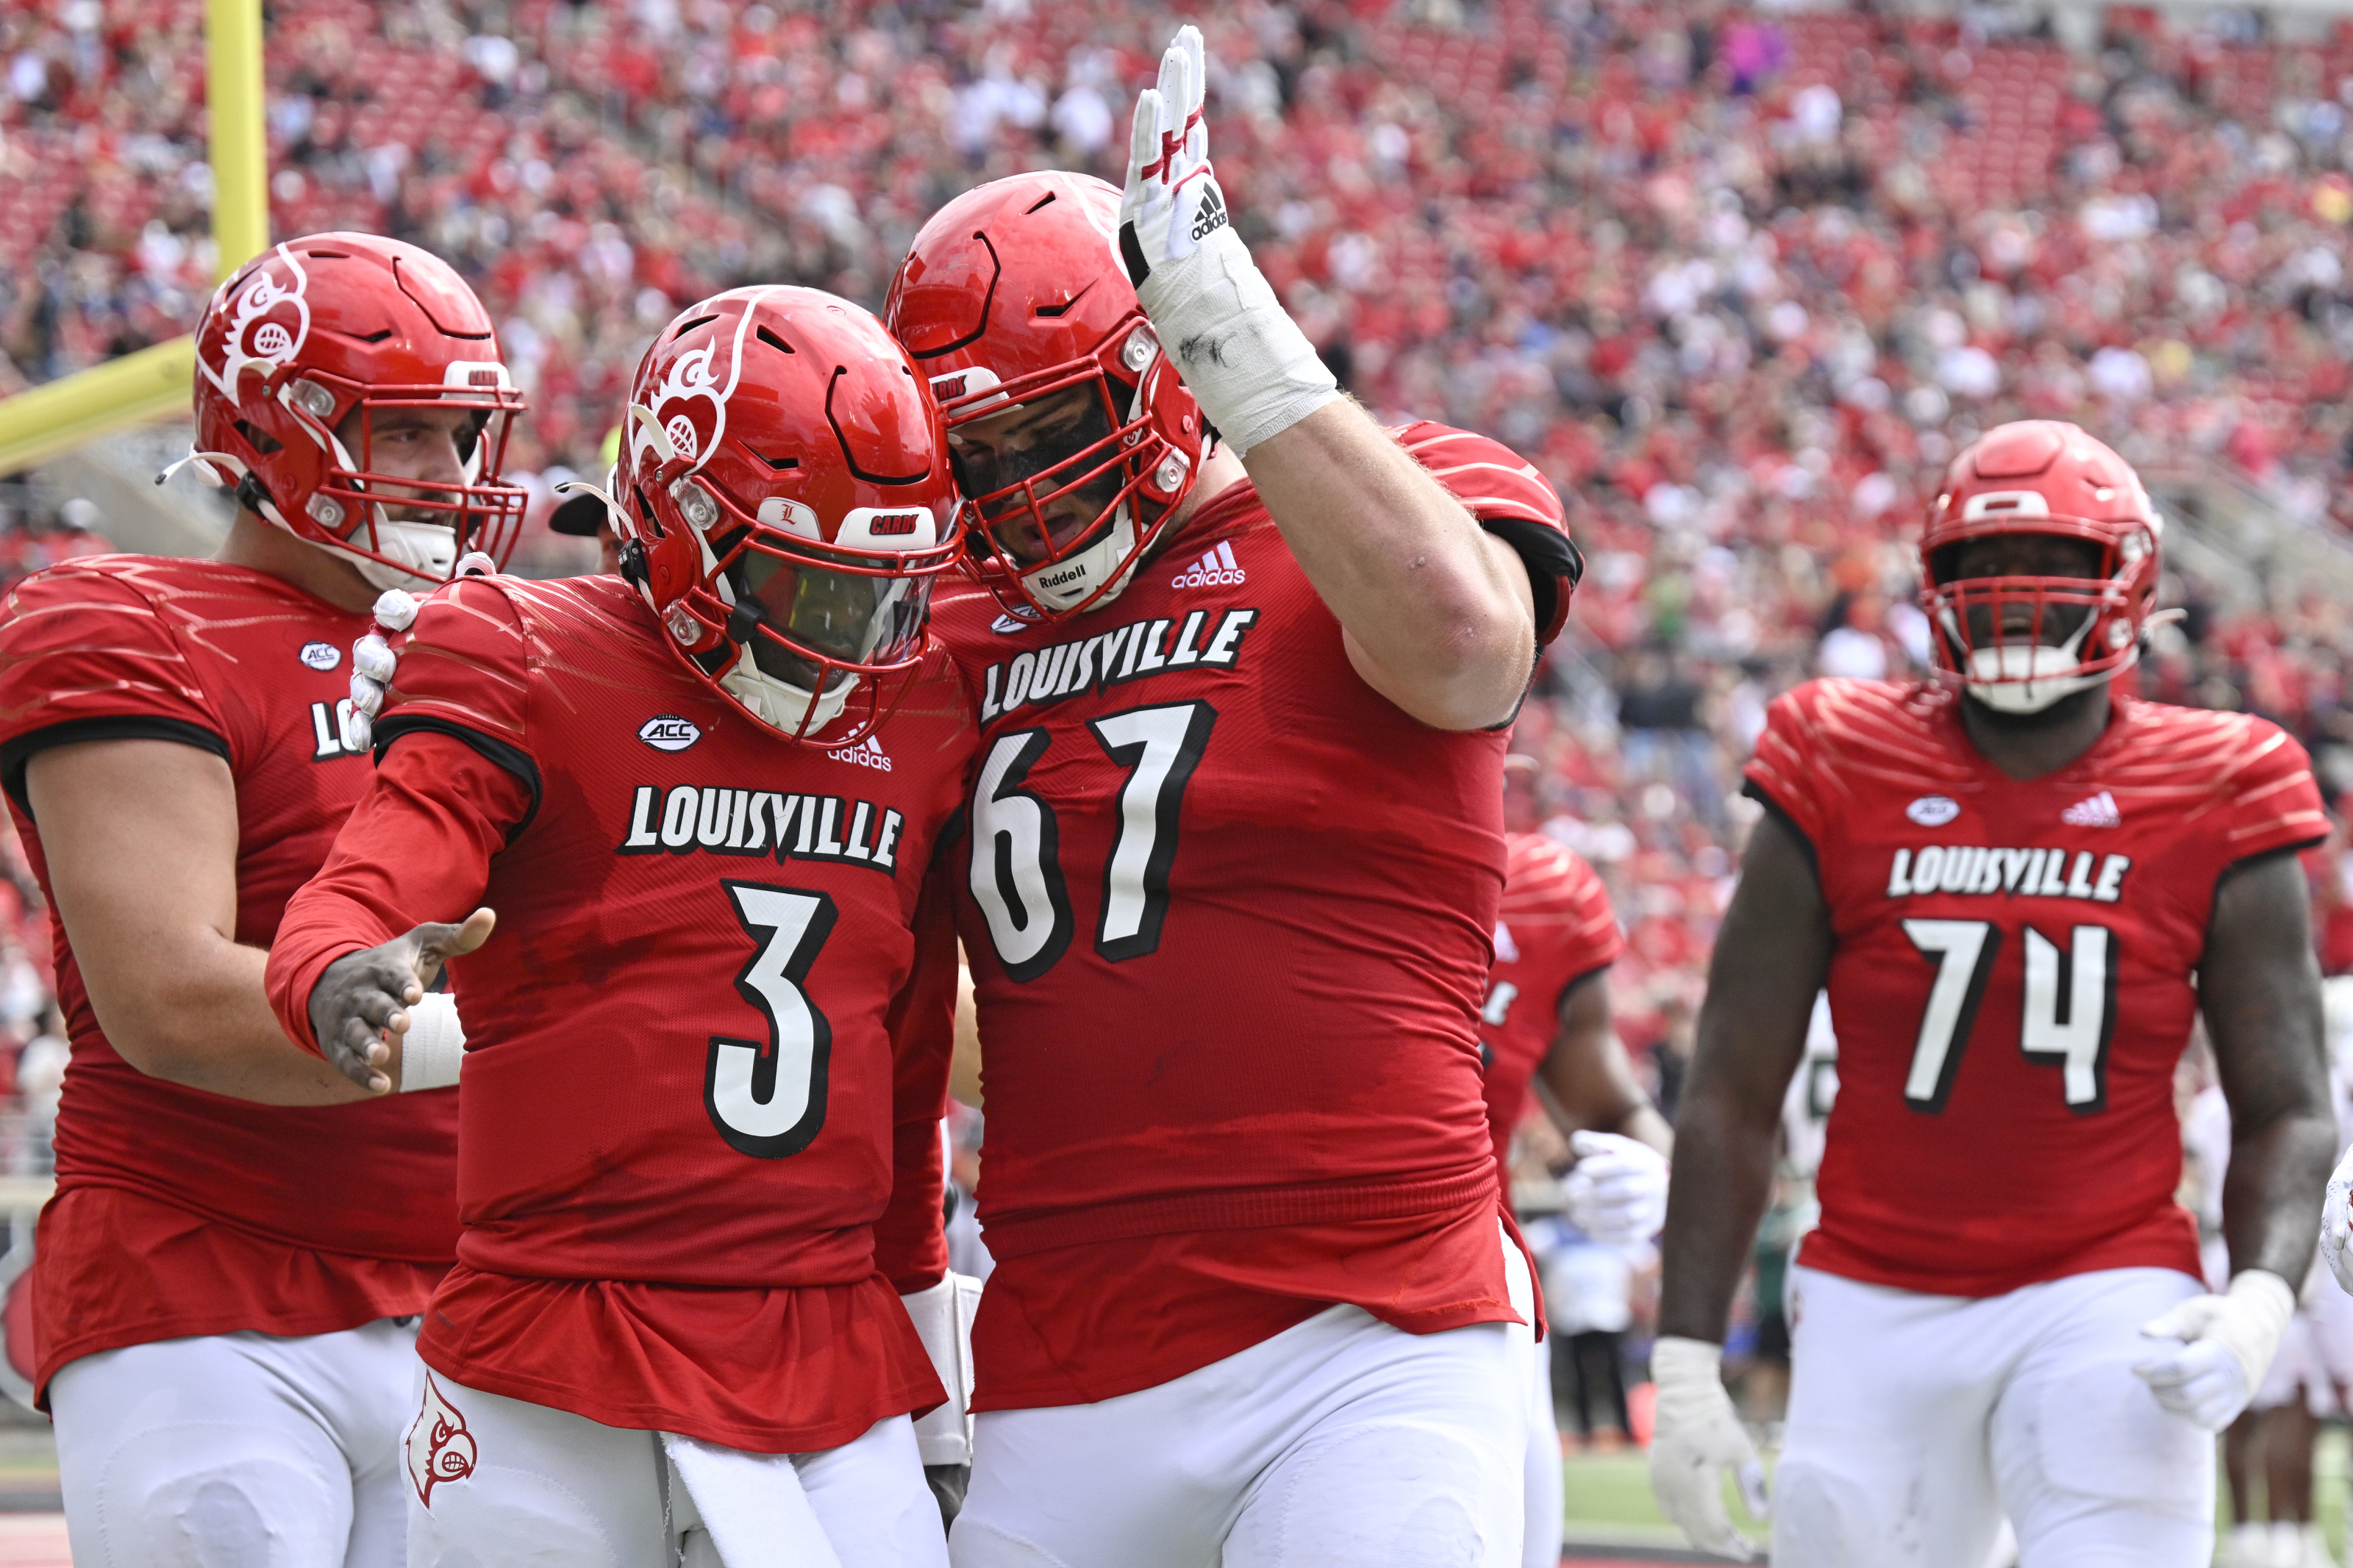 Louisville has used the transfer portal to get help at quarterback